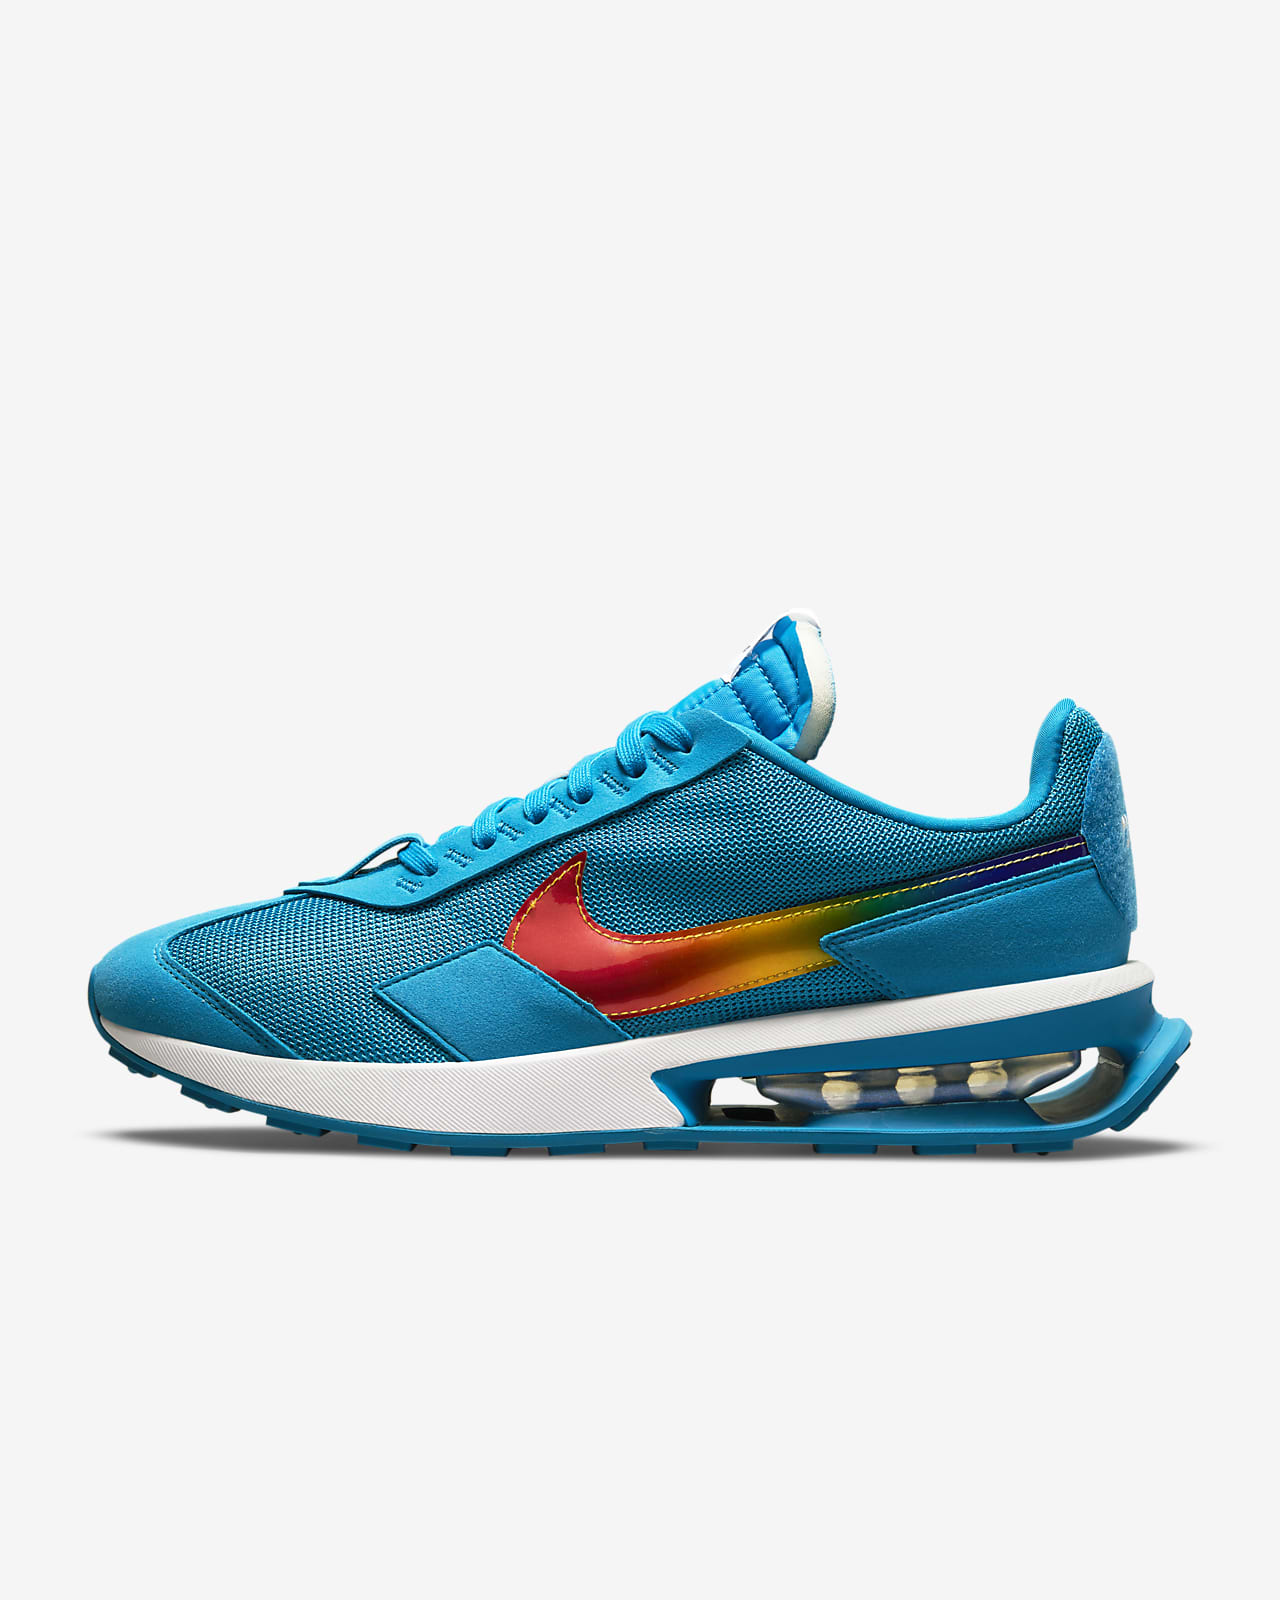 nike shoes air max 2015 price philippines